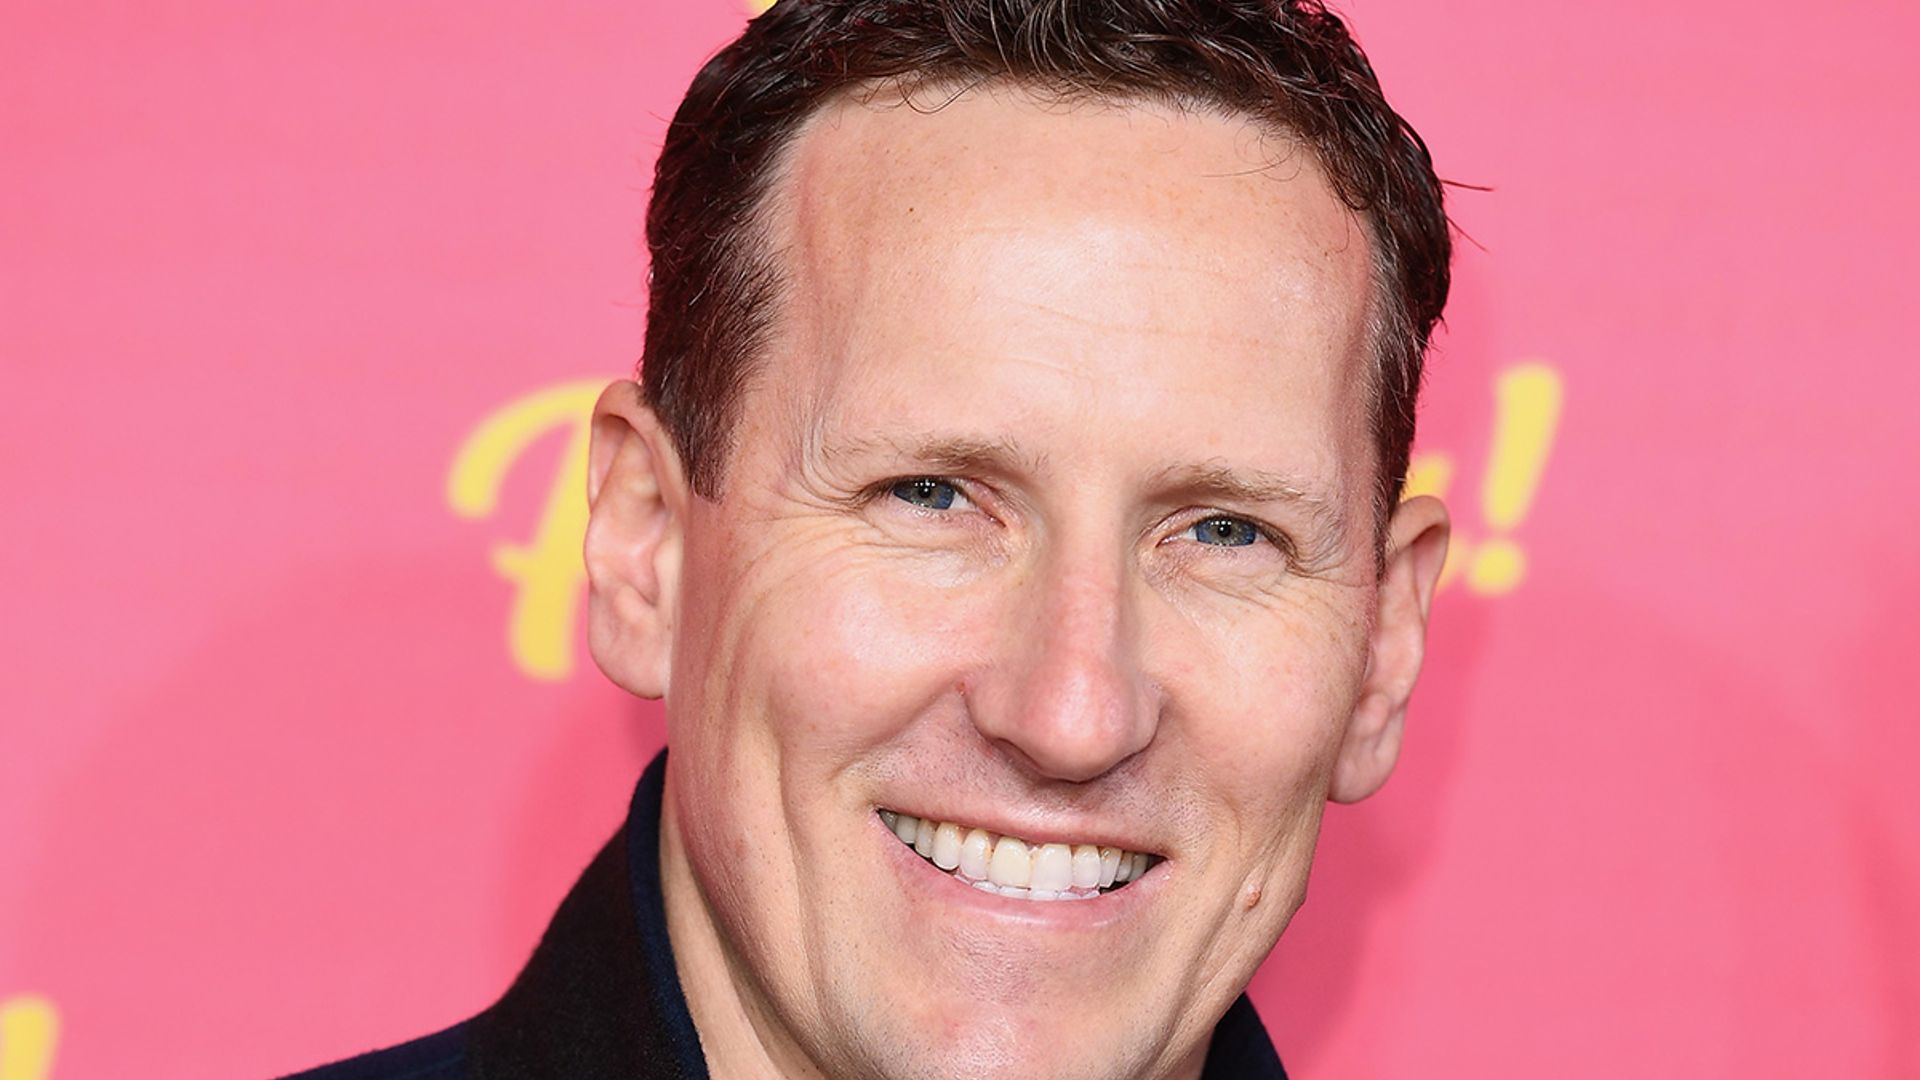 Brendan Cole deletes Instagram post after causing offence to some fans